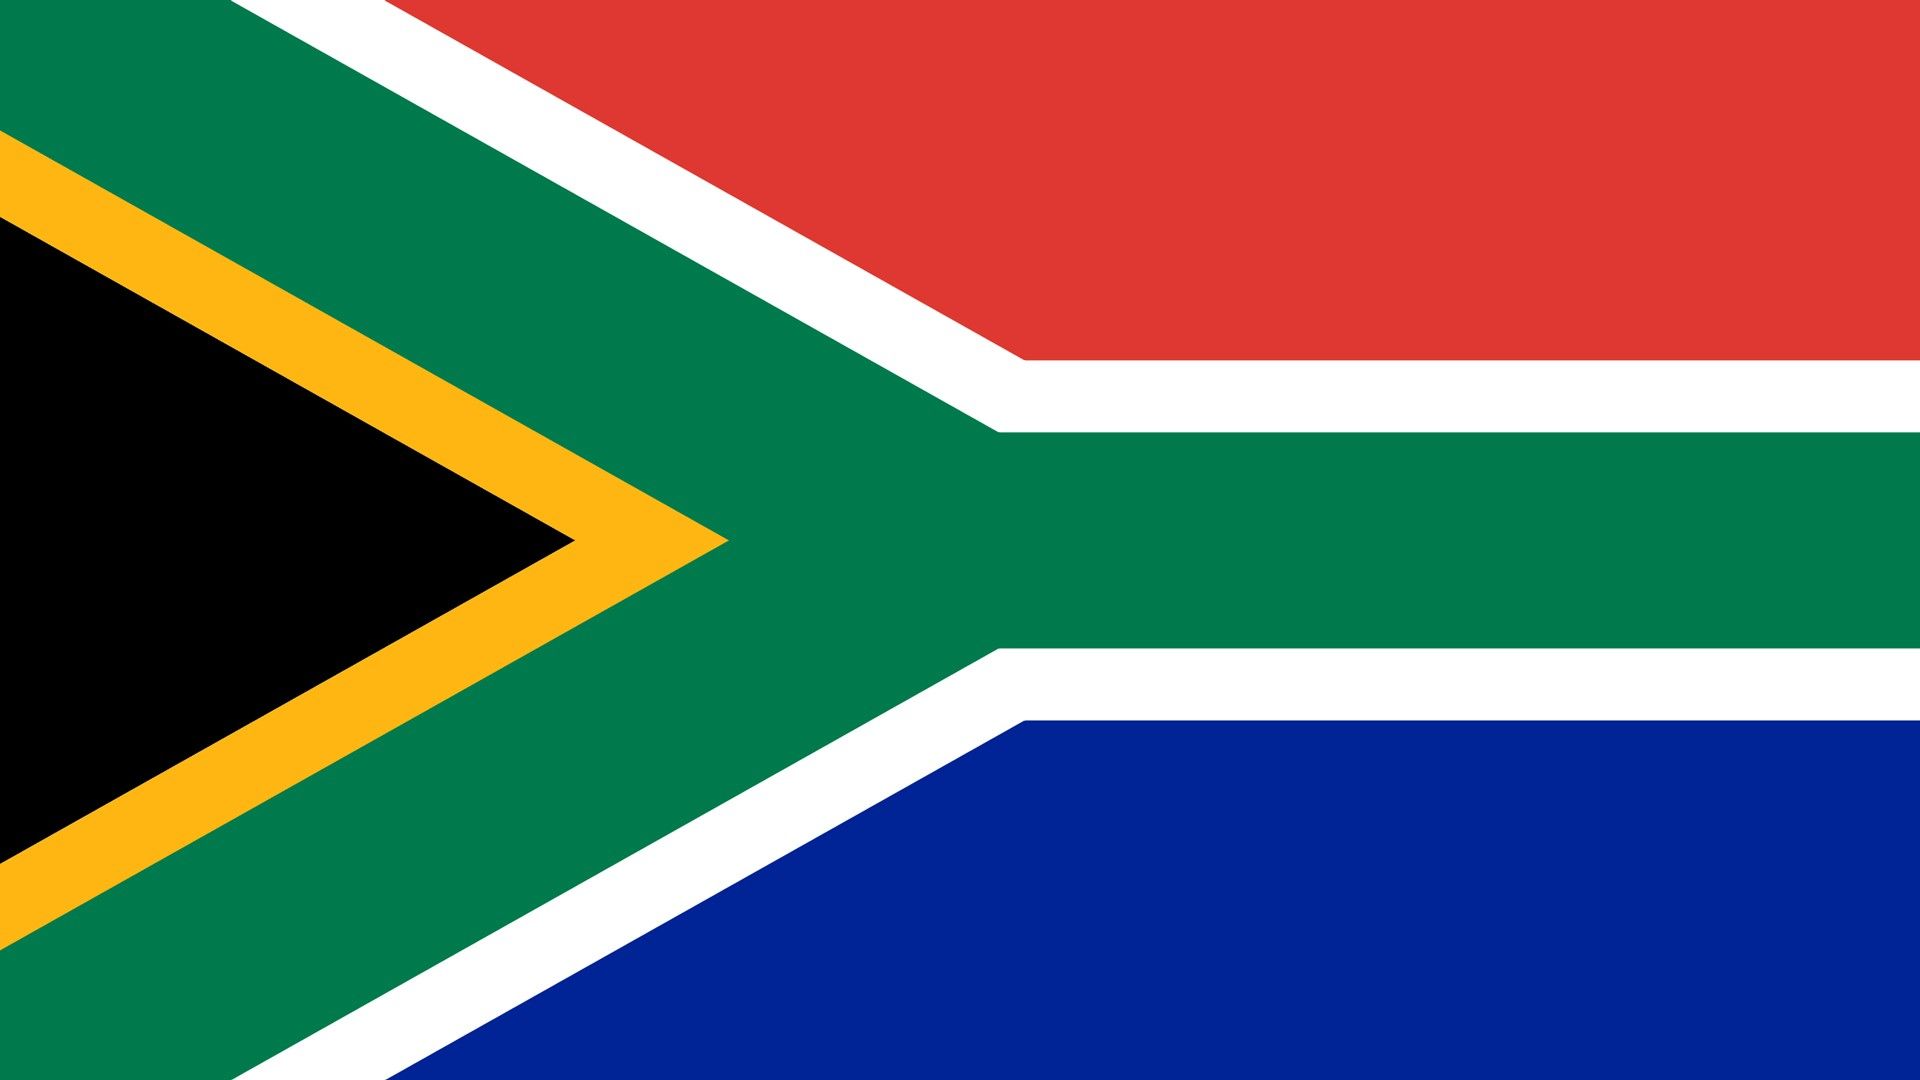 South Africa Flag wallpaper. South africa flag, South african flag, Africa flag